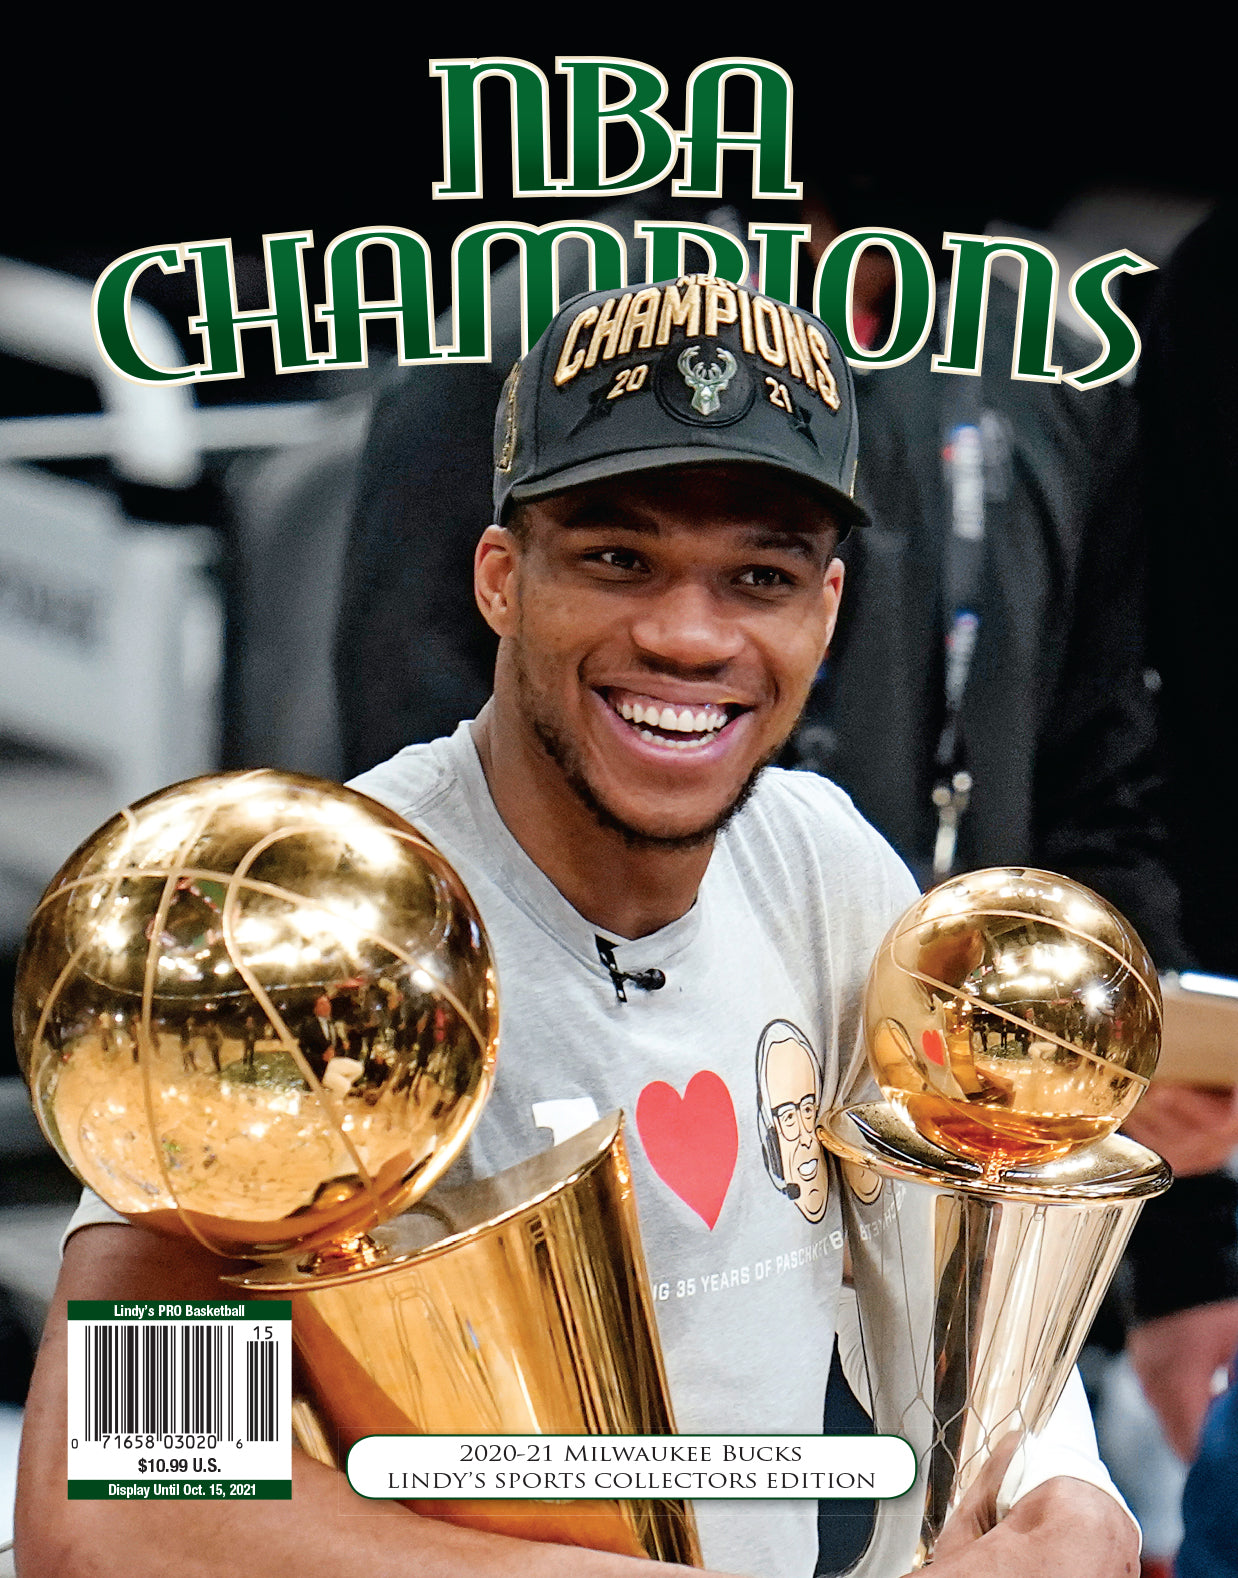 Lids on X: The Milwaukee Bucks are your 2021 NBA Champions!  Congratulations @Bucks 🦌 Find 2021 Milwaukee Bucks Championship gear in  select stores soon and online now! #FearTheDeer #NBAFinals   / X